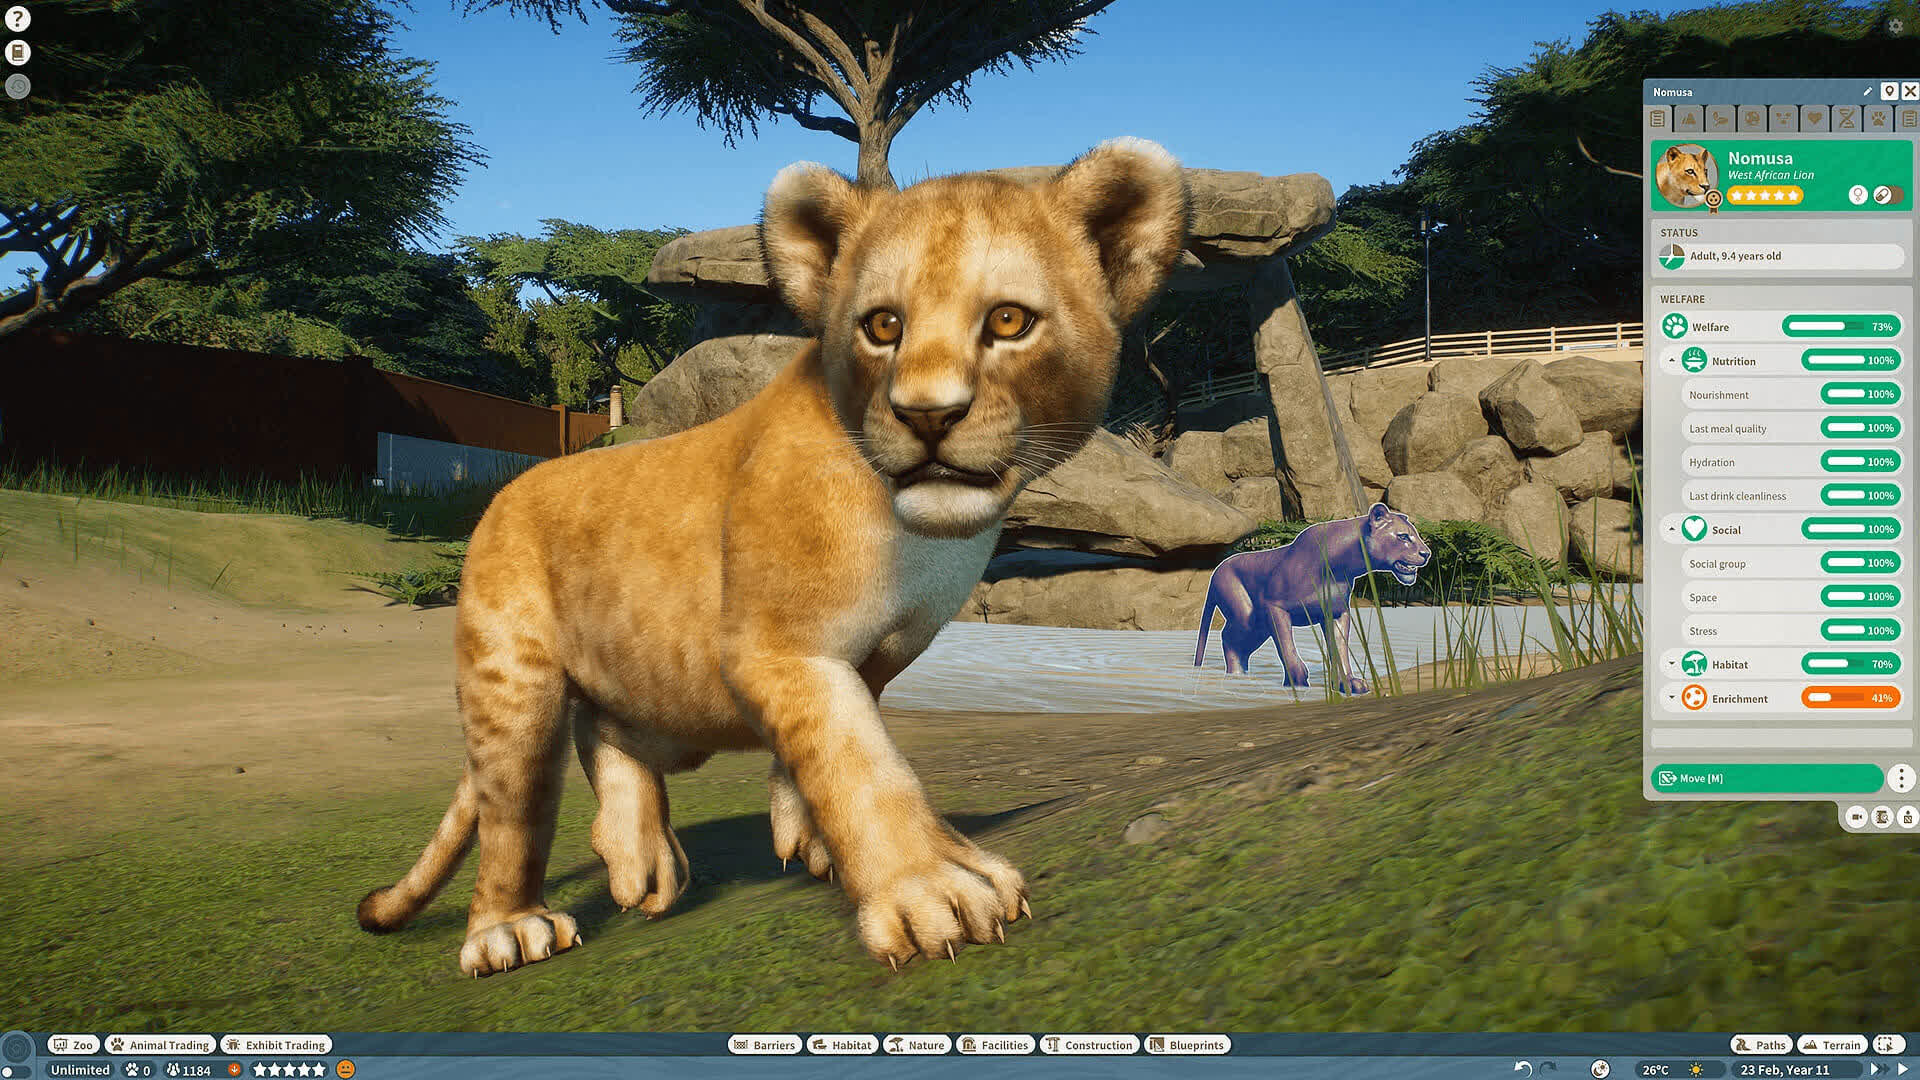 Planet Zoo Reviews, Pros and Cons | TechSpot